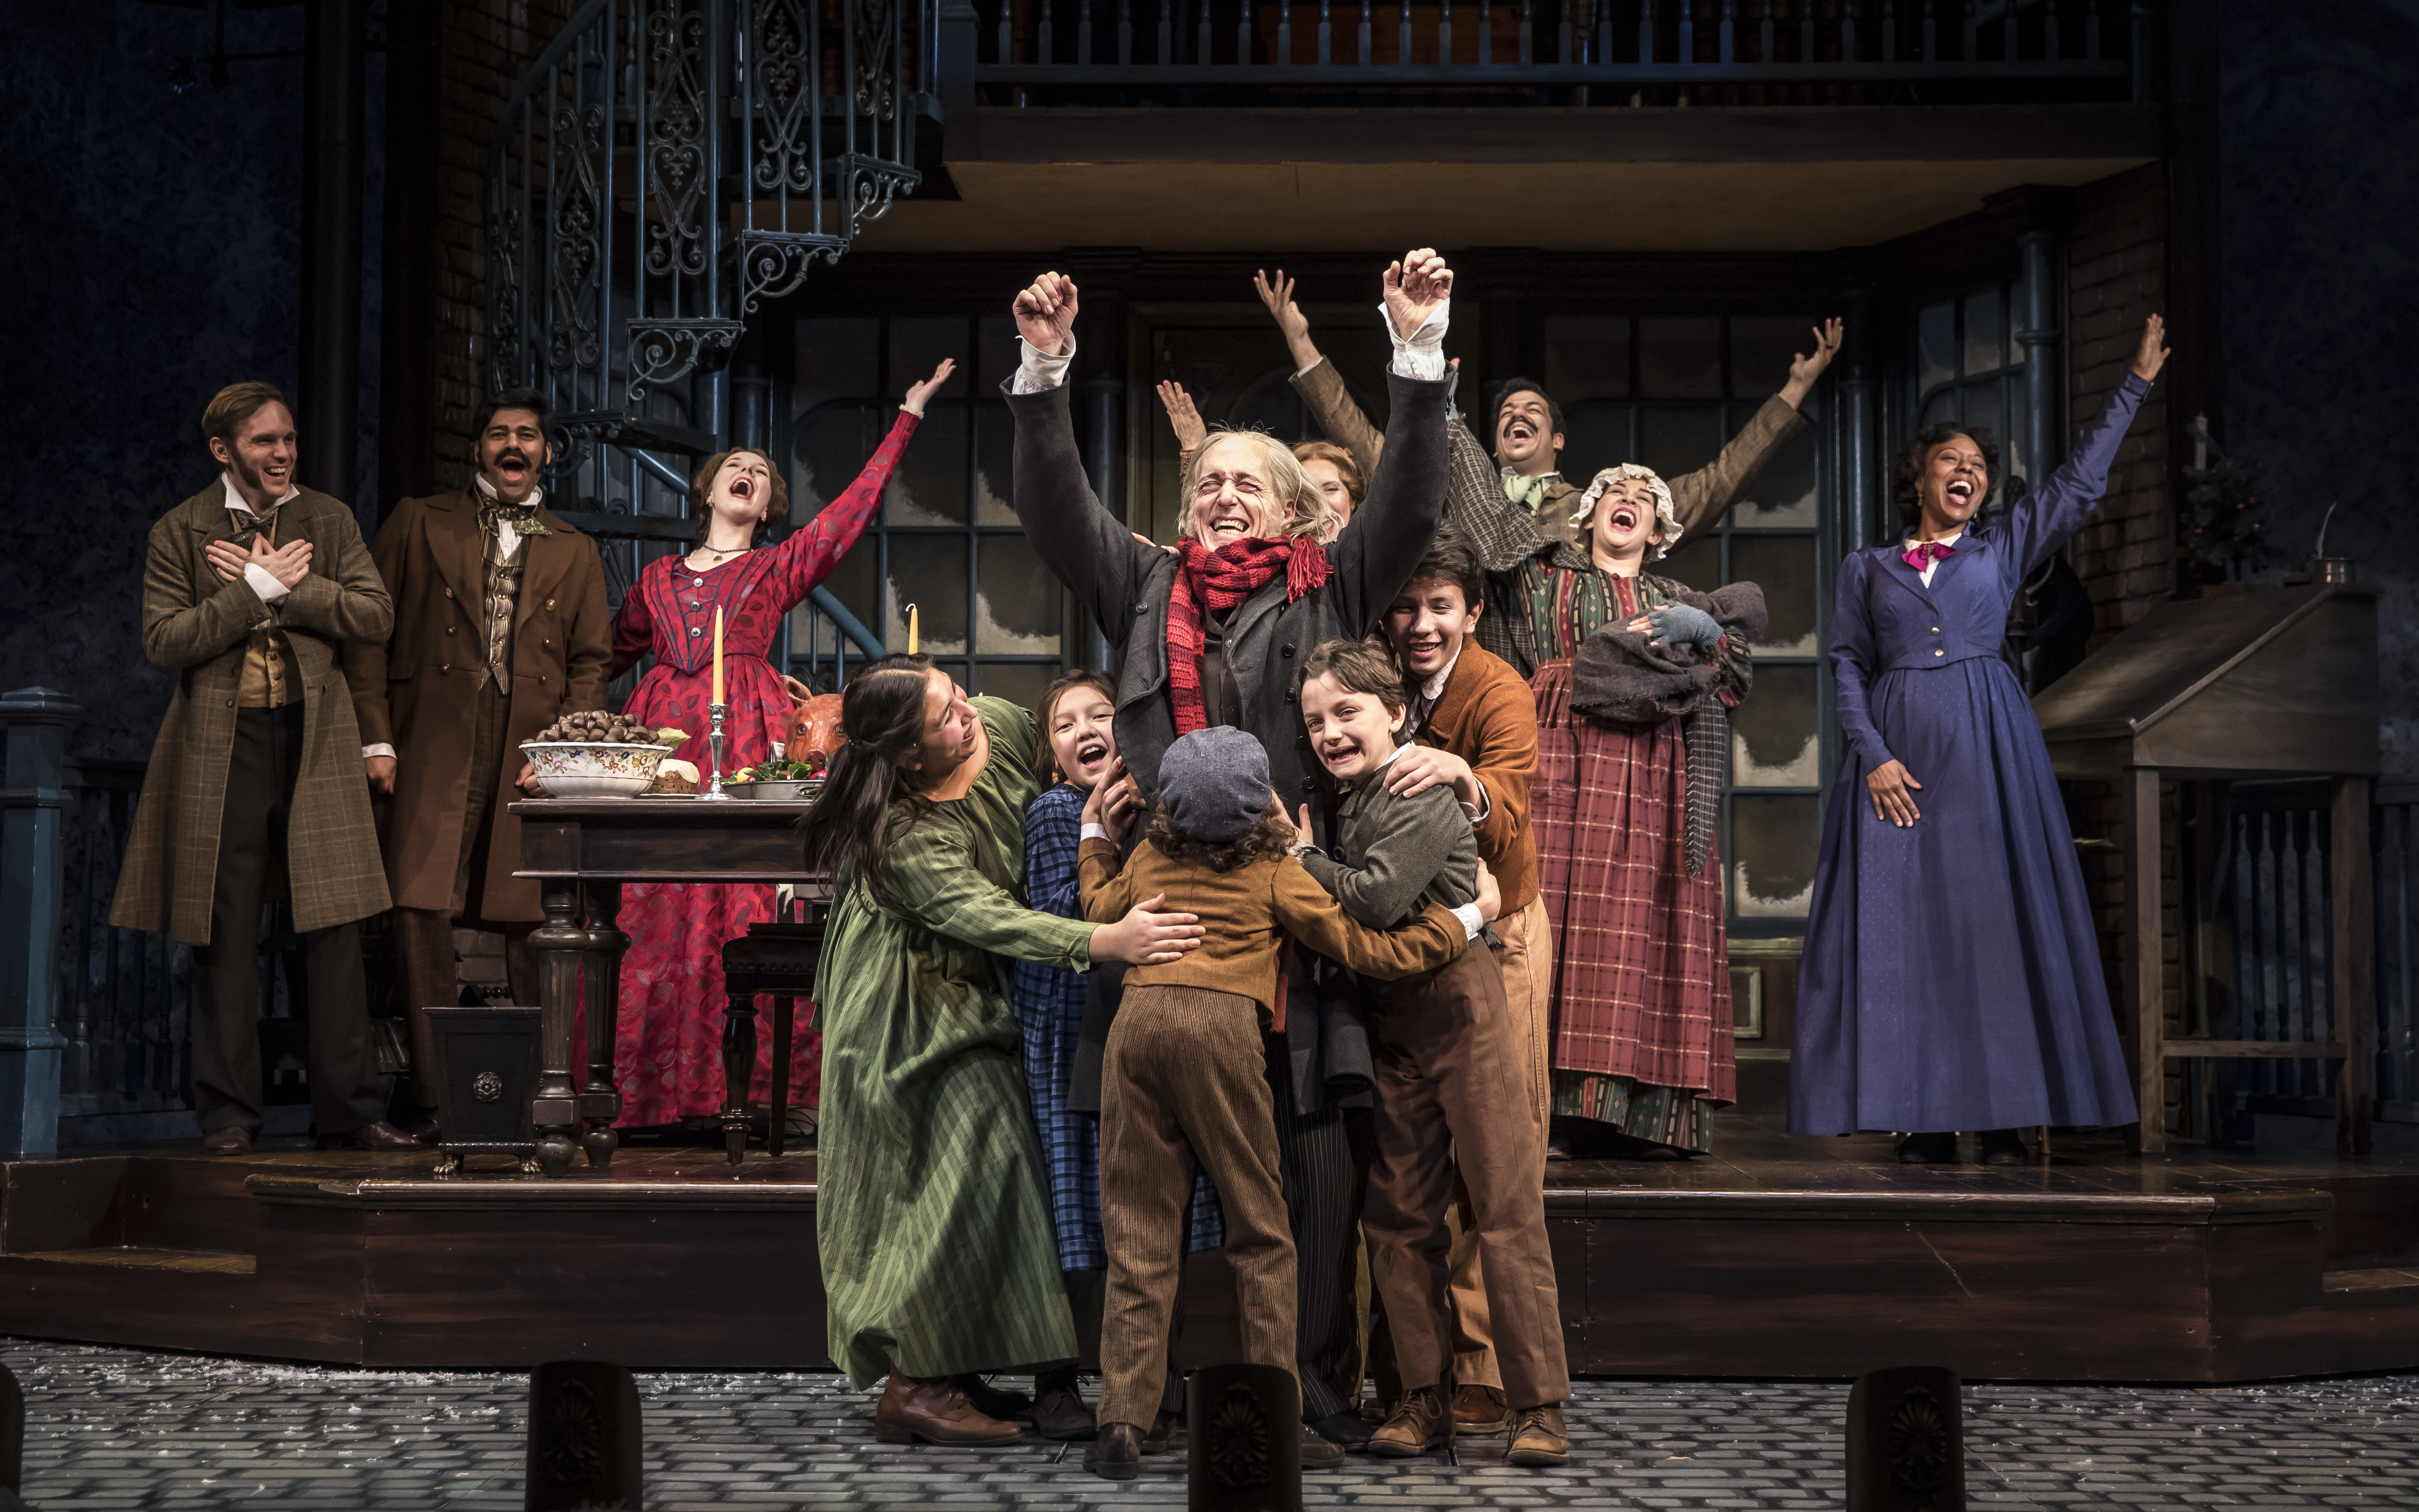 "A Christmas Carol" at Goodman Theatre in Chicago